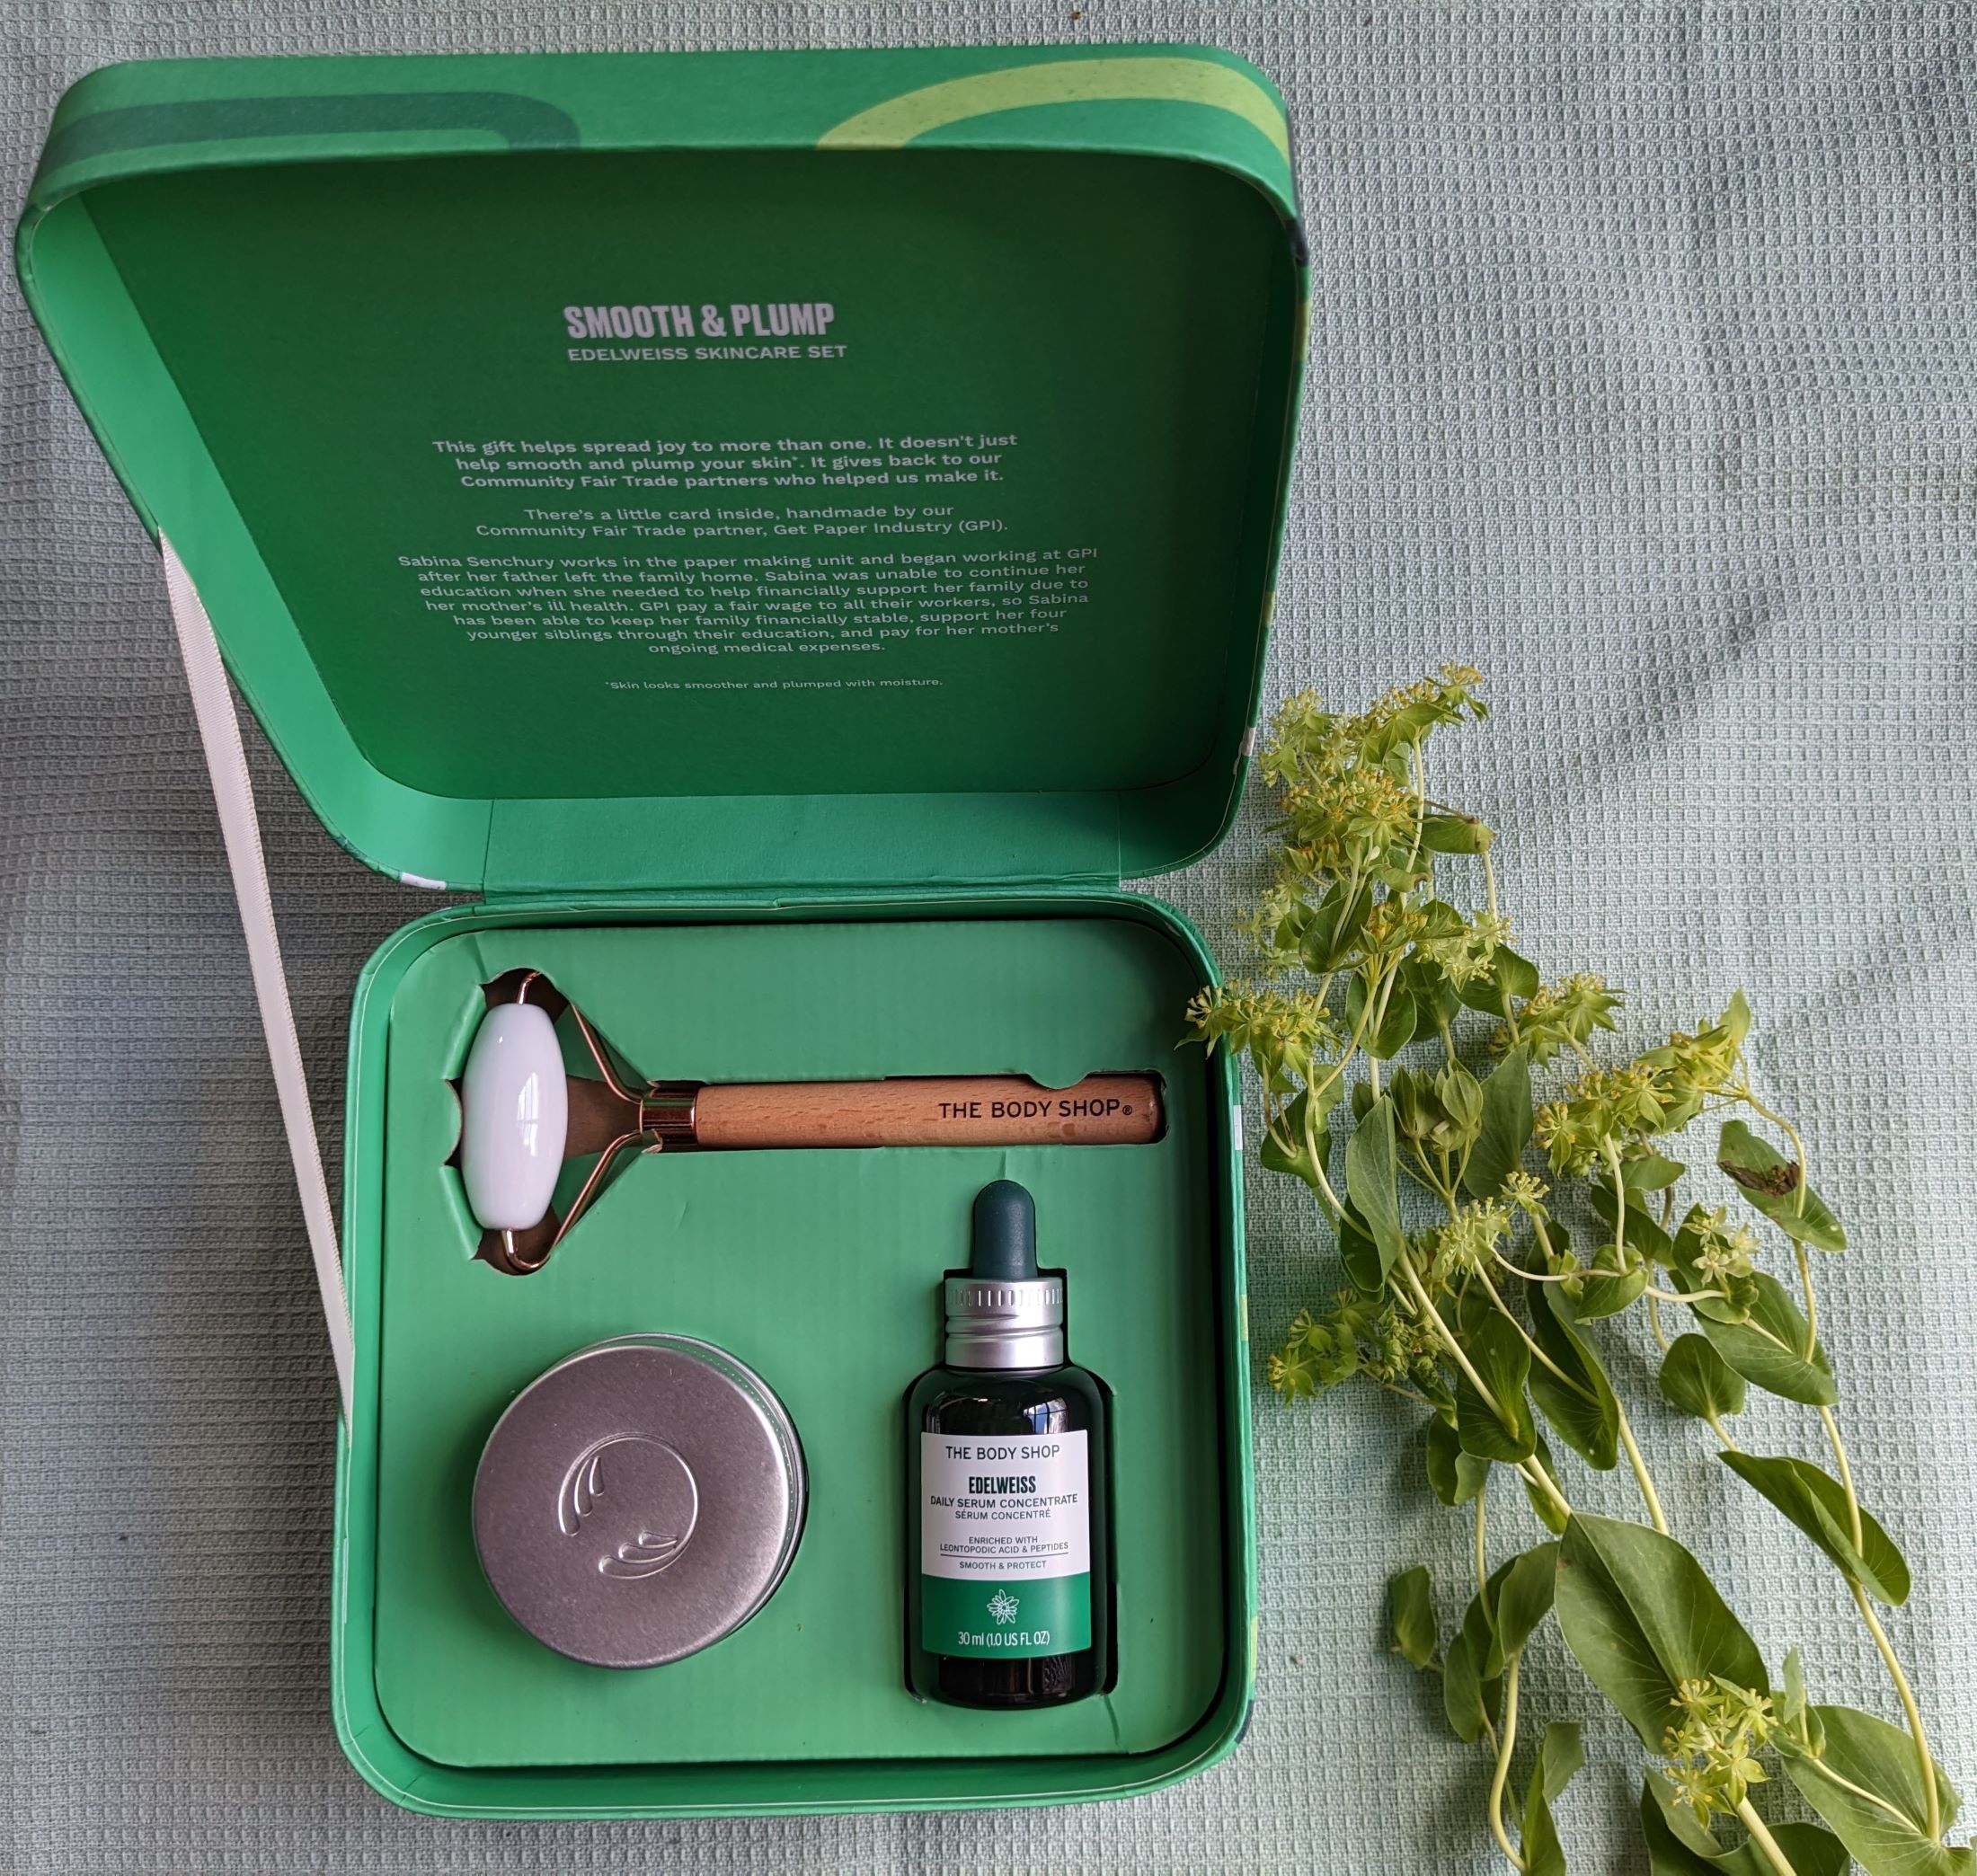 The Body Shop Edelweiss gift set in a green presentation box containing edelweiss serum, cream and a face roller